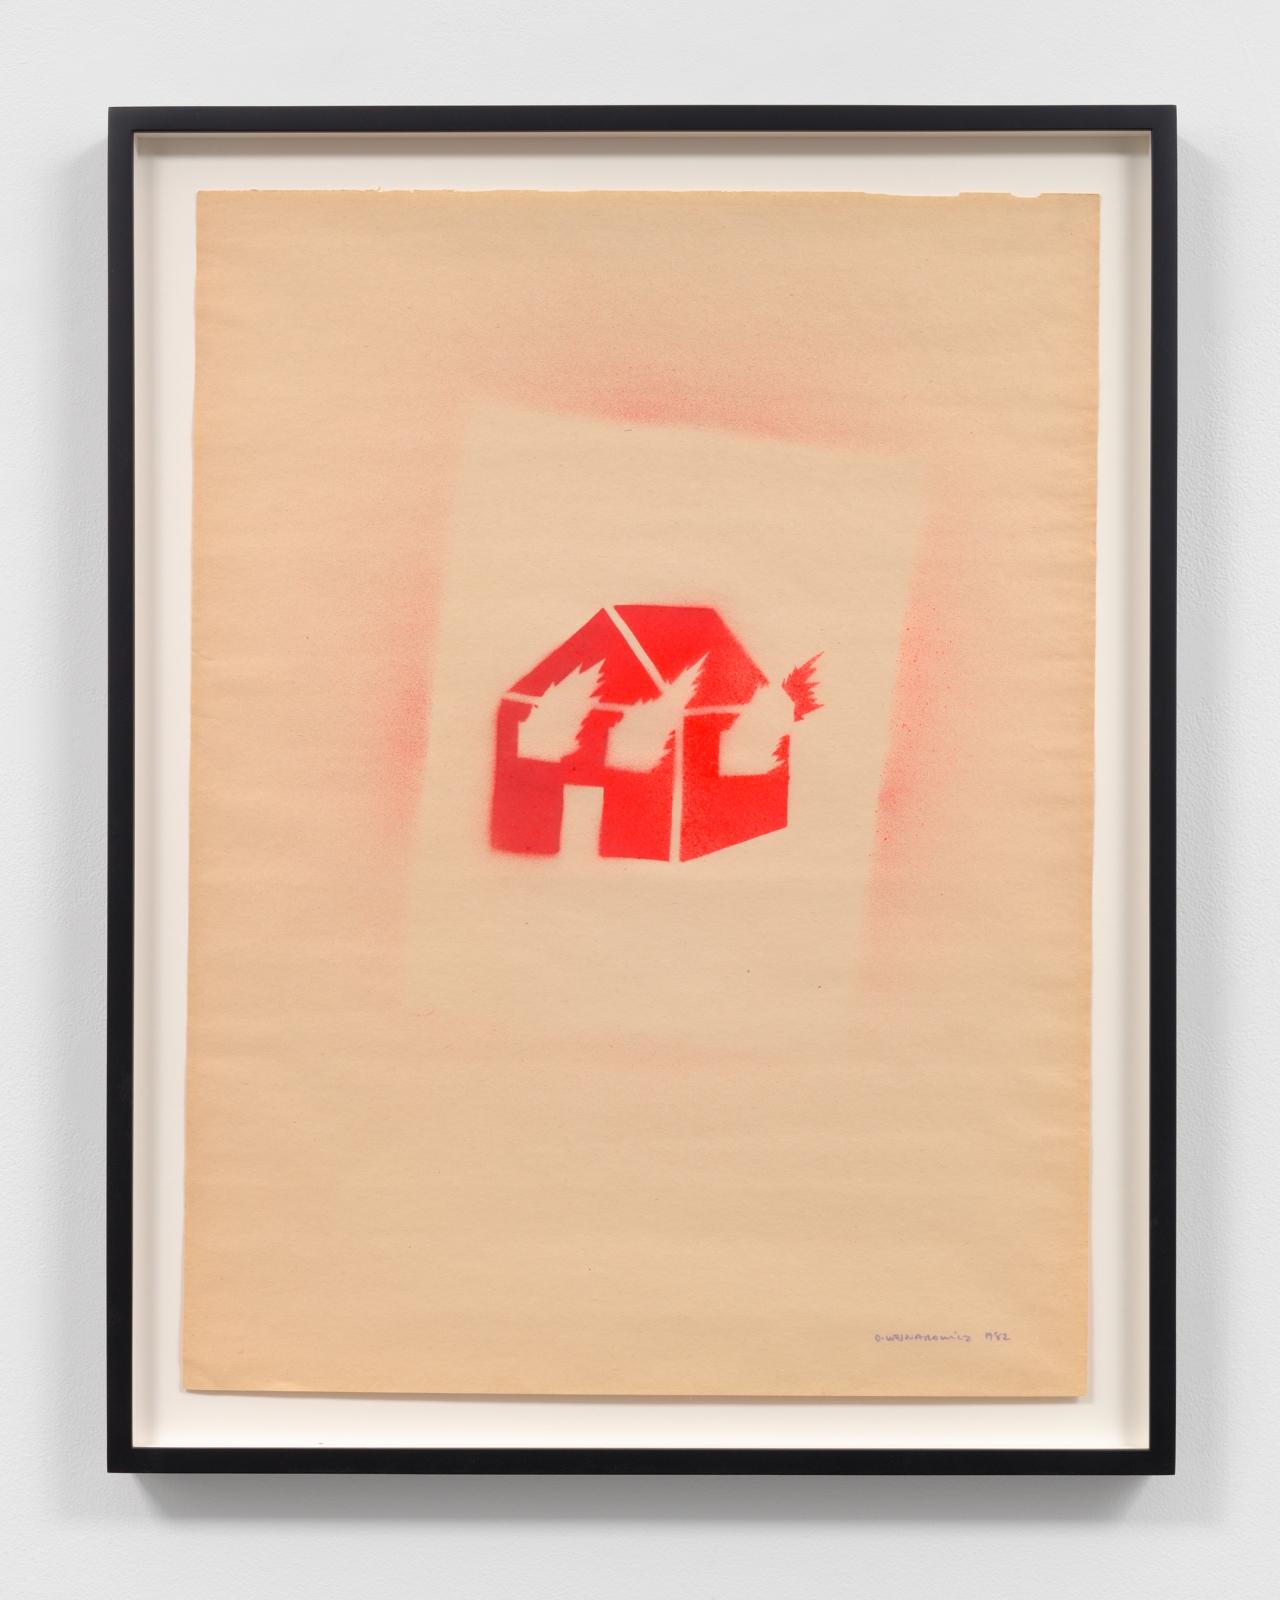 David Wojnarowicz
Untitled (Burning House), 1982
signed and dated, lower right
stencil on paper
23 7/8 x 17 7/8 ins.
60.6 x 45.4 cm